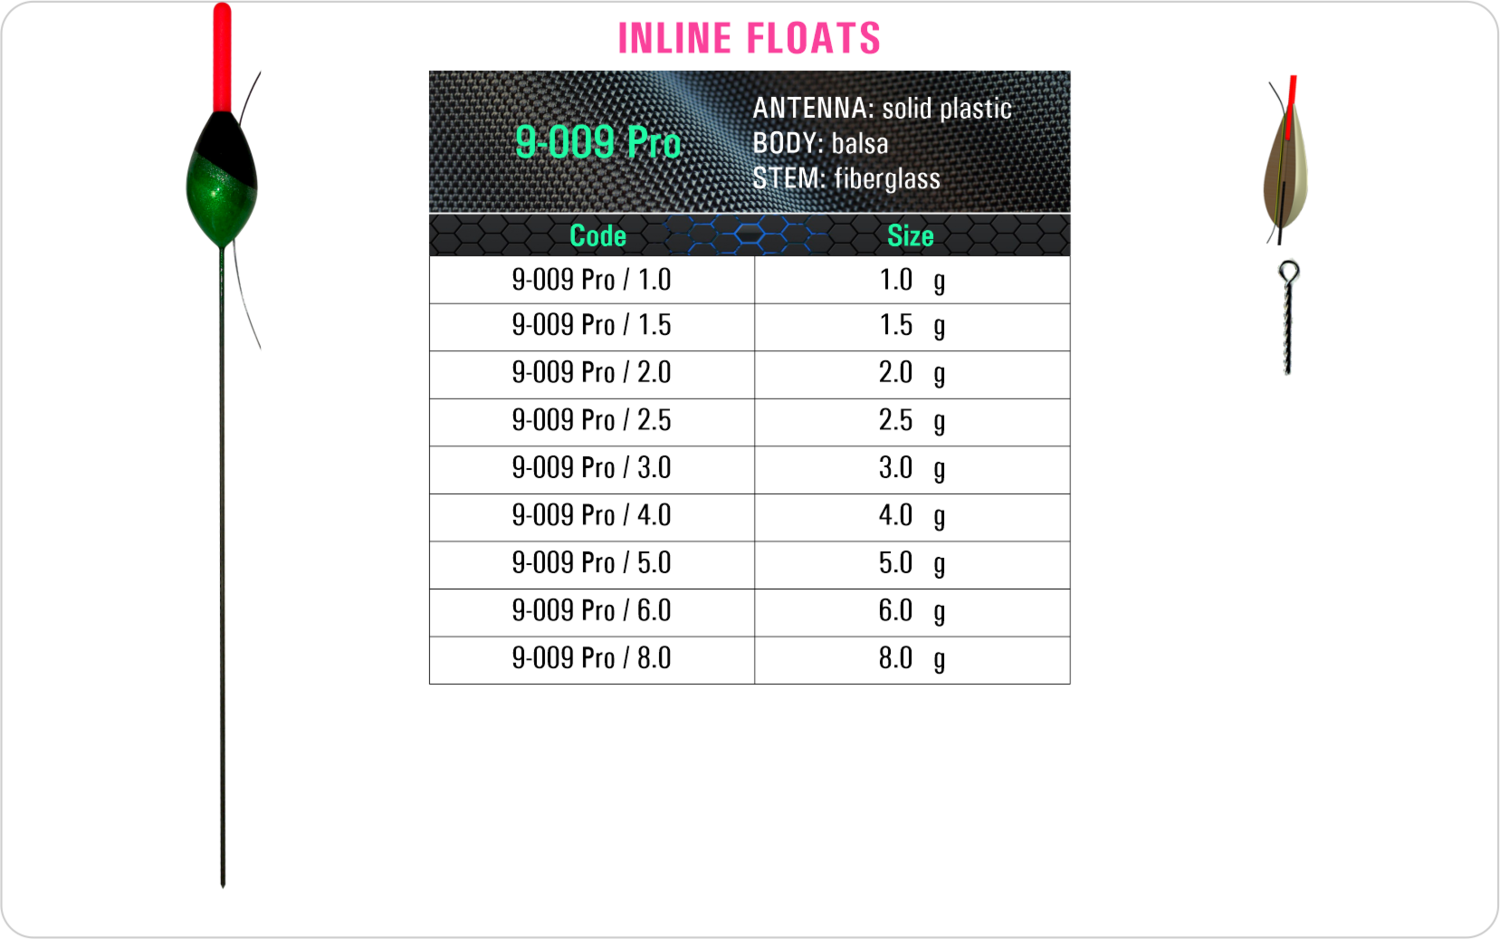 SF 9-009 Pro - Lake and river float model and table containing an additional information about this float with different codes, sizes, types of the body, the stem and the antenna of the float.